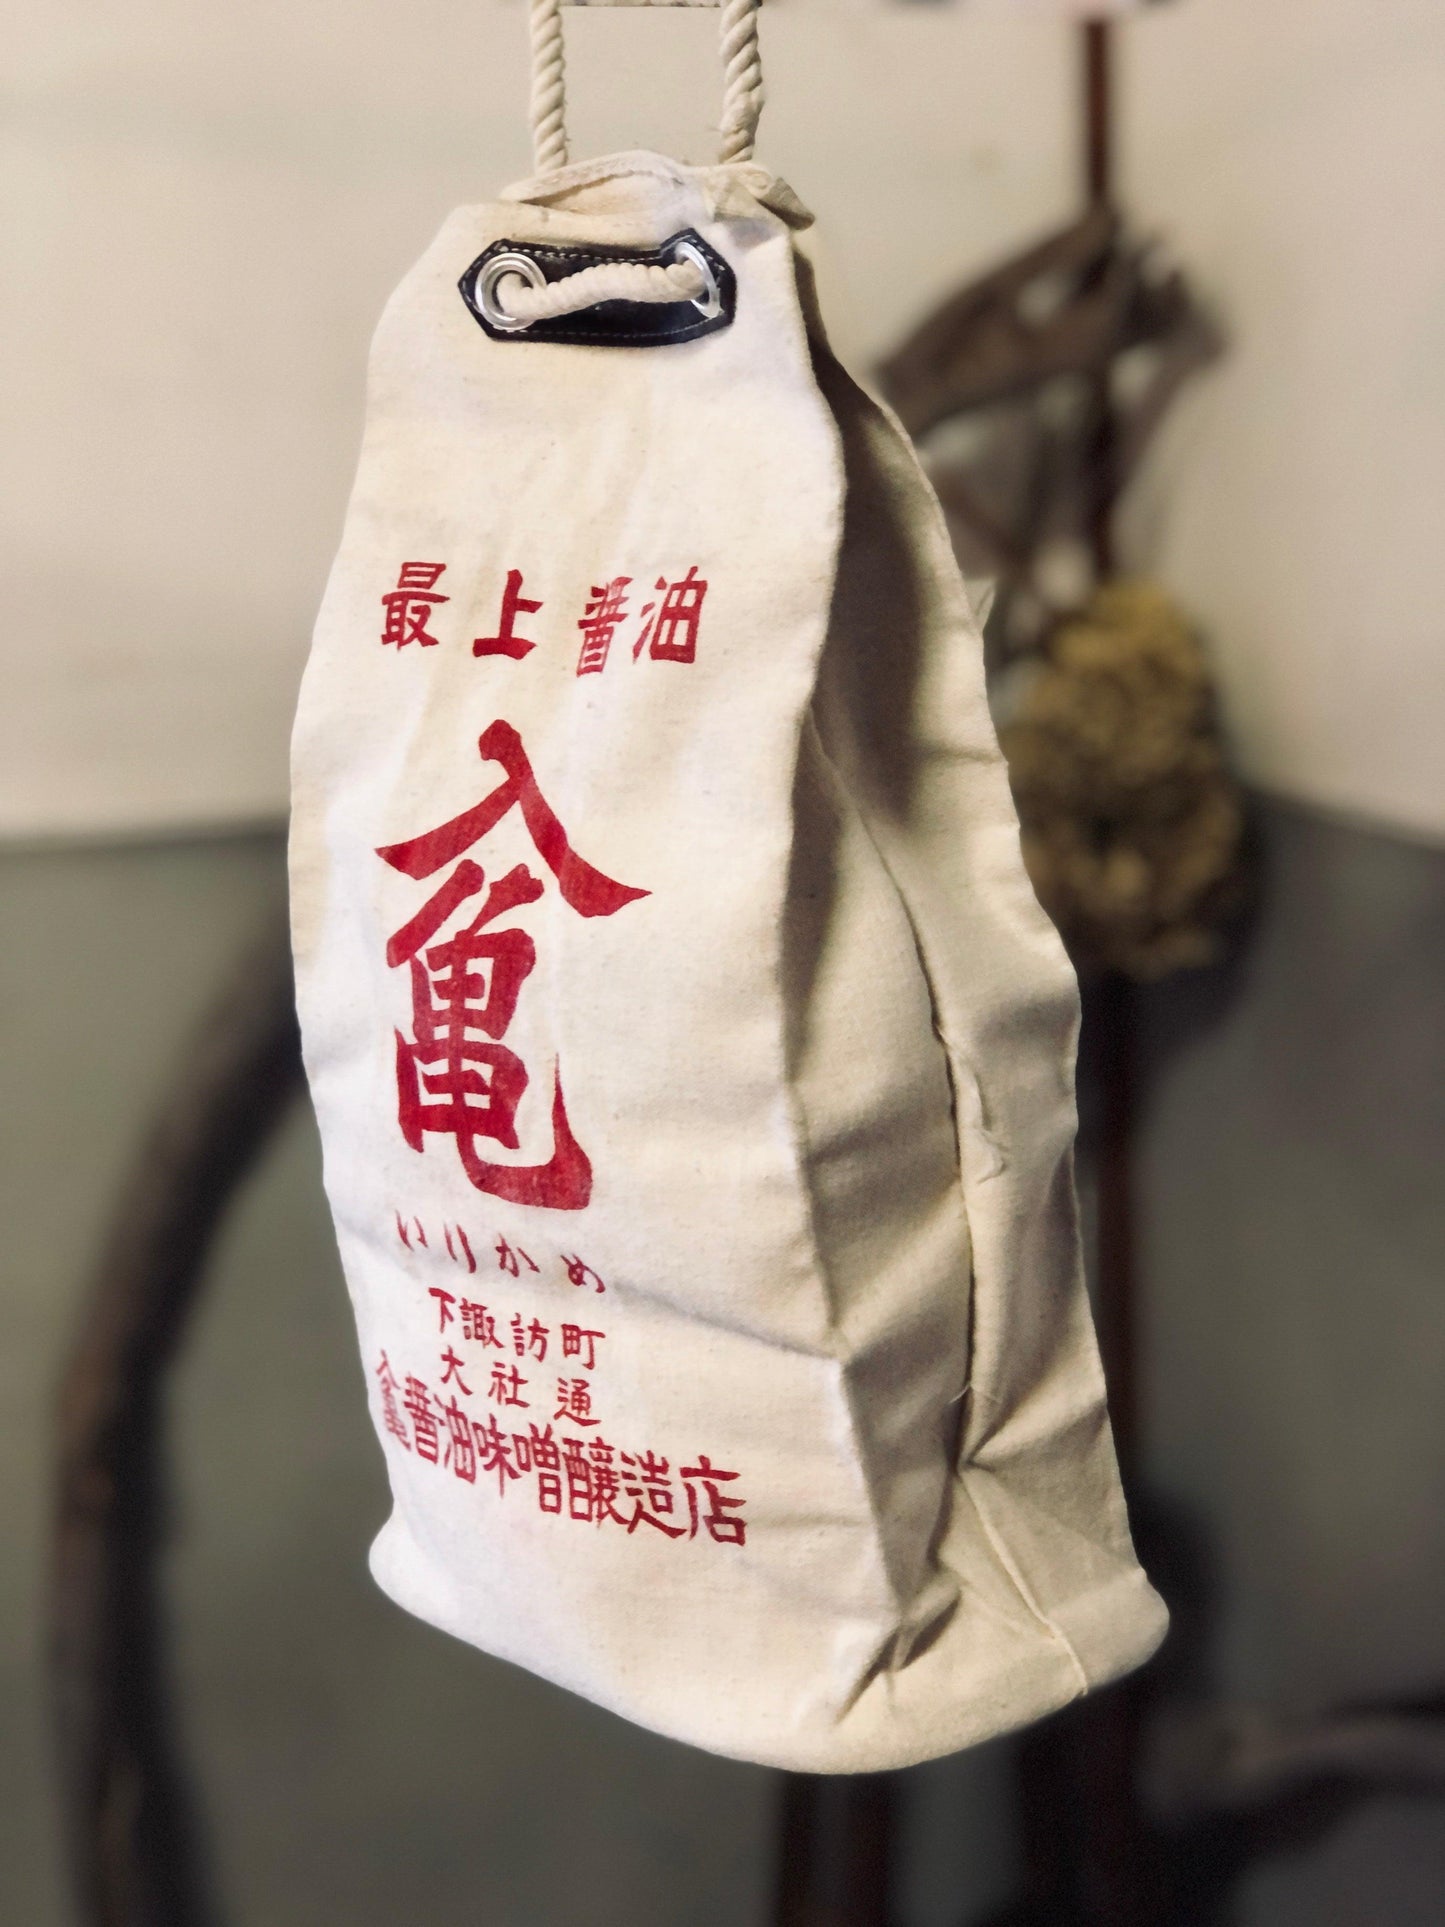 Dead stock Japanese bag from soy sauce company - VINTAGE BLUE JAPAN